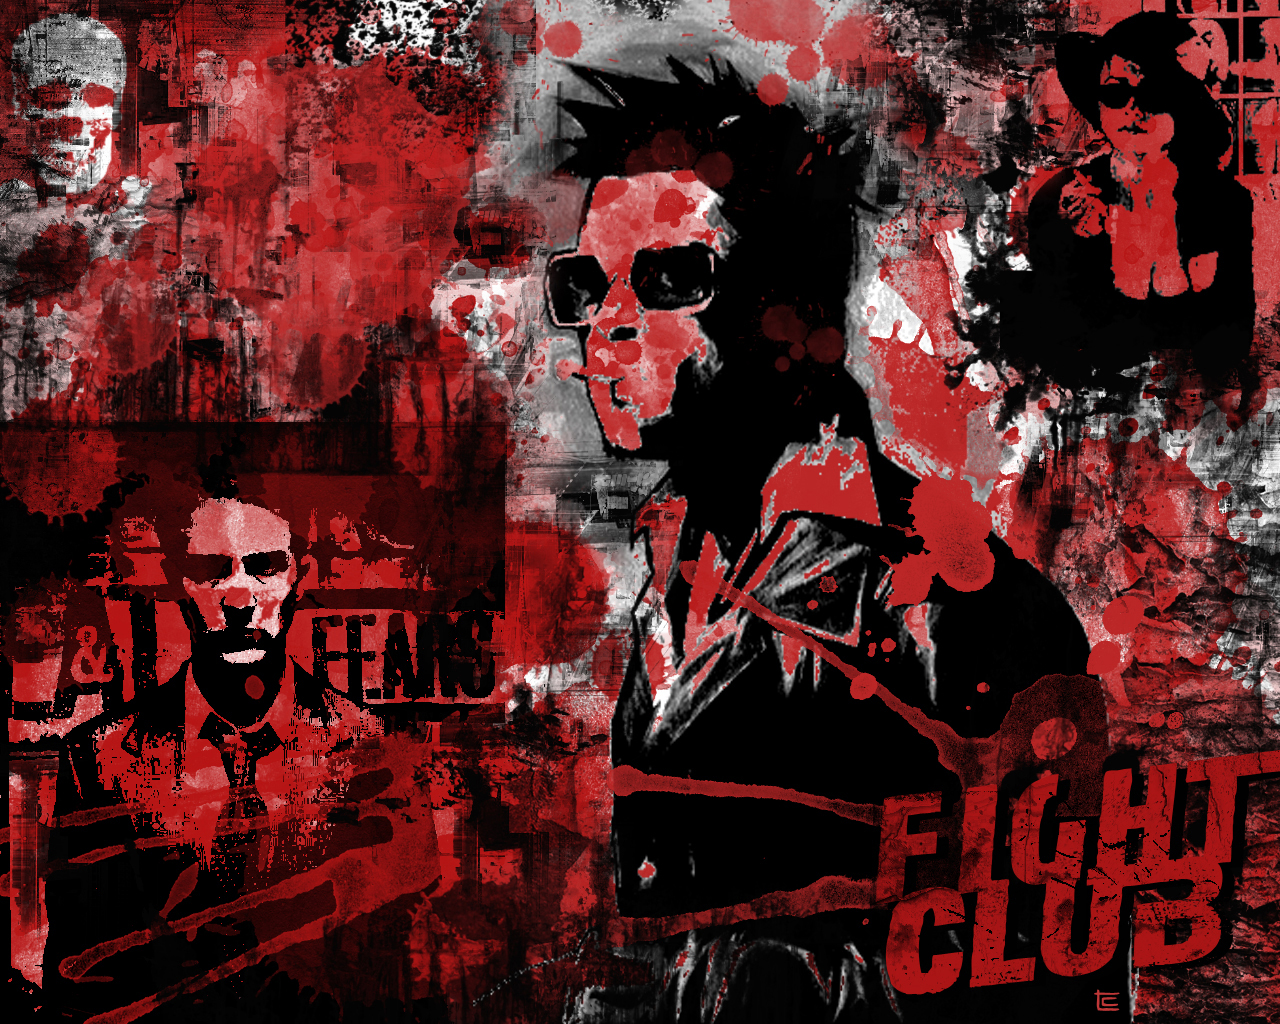 fight club 4k iPhone Wallpapers Free Download